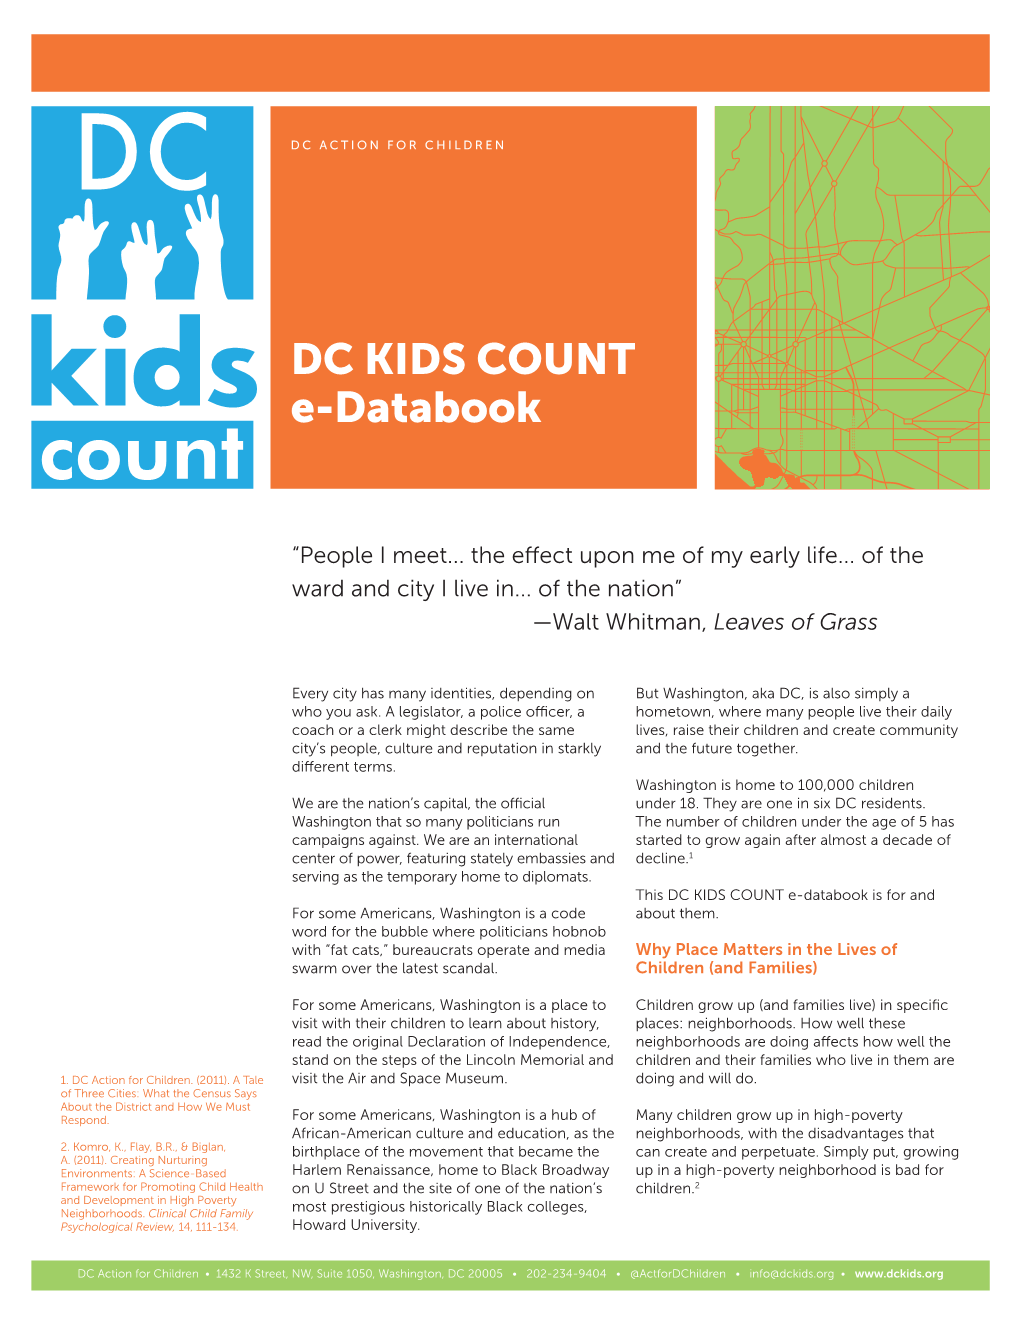 DC Kids Count E-Databook